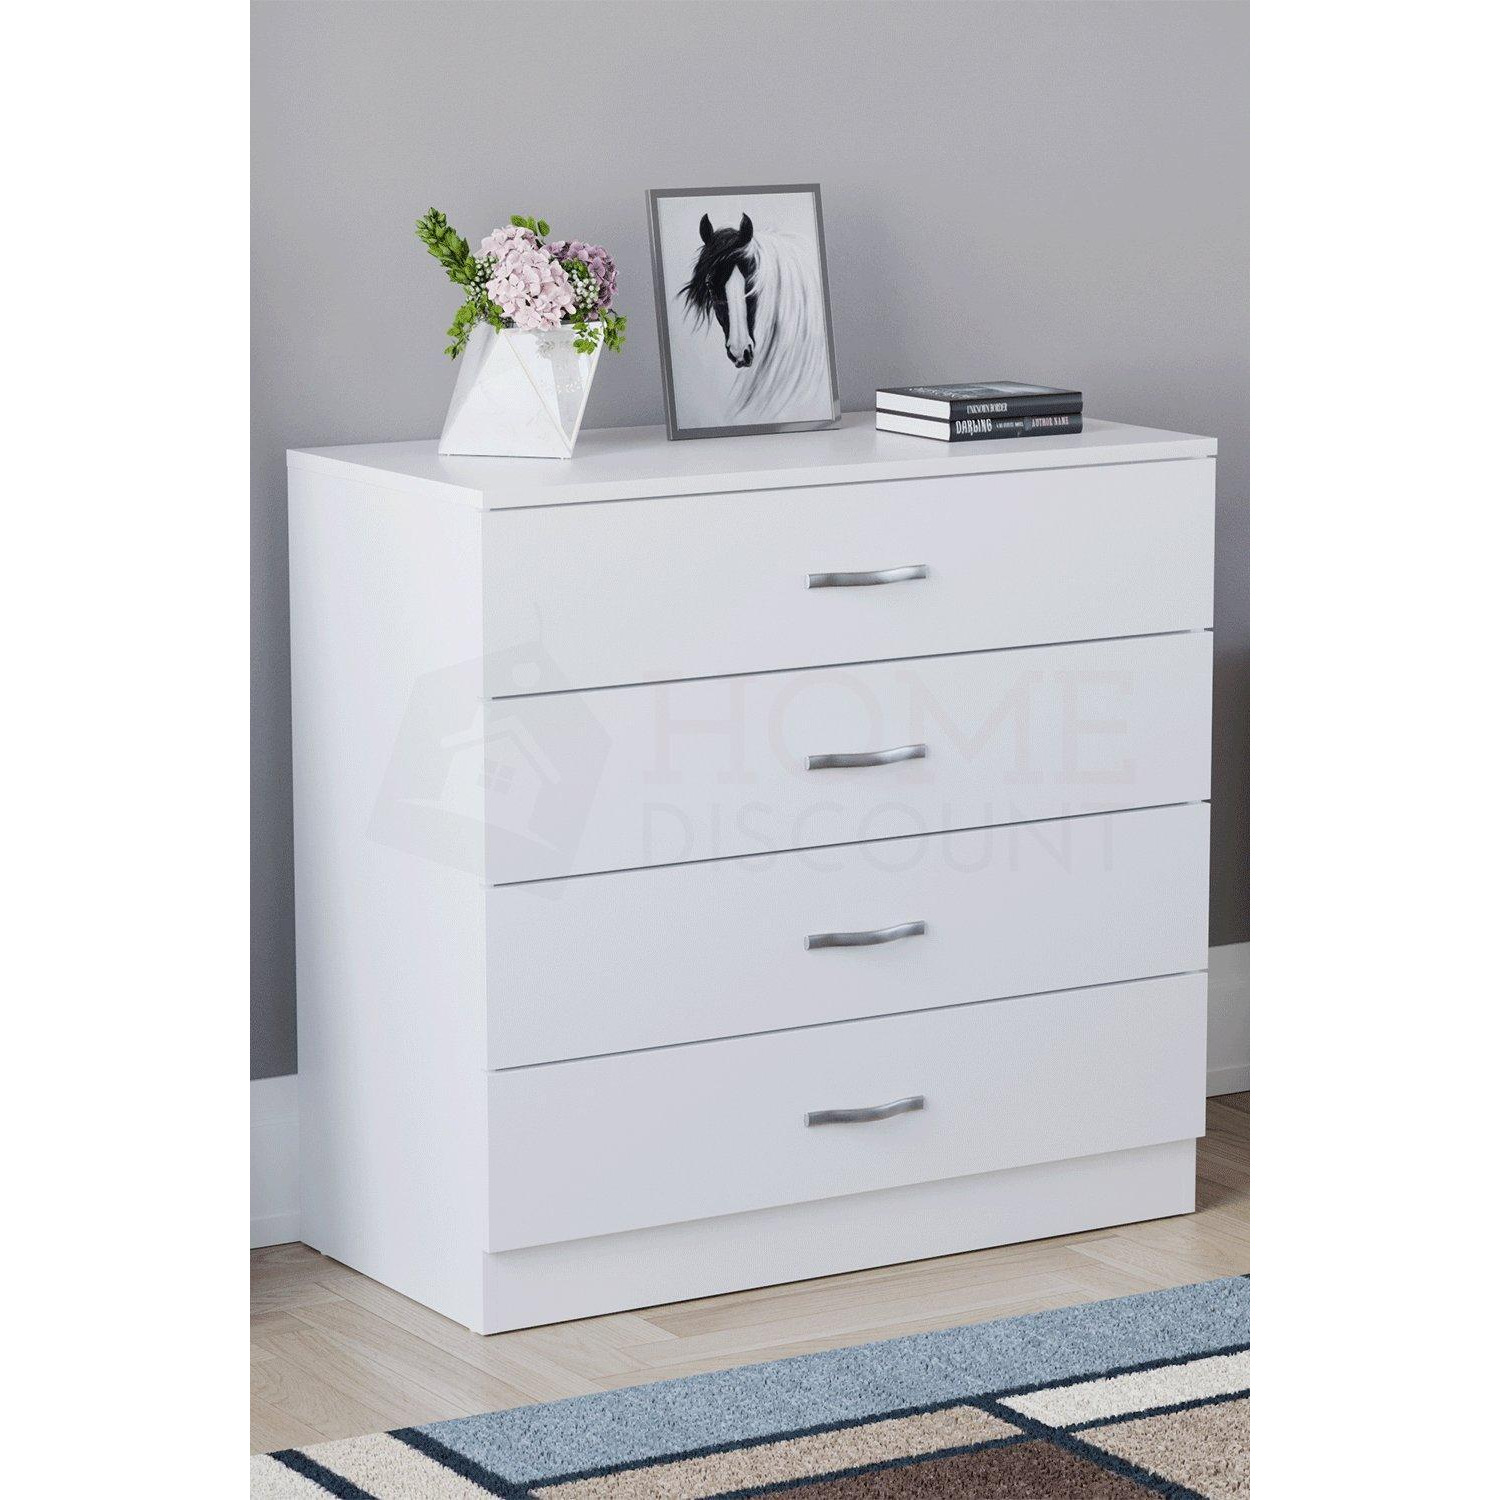 Vida Designs Riano 4 Drawer Chest of Drawers Storage Bedroom Furniture - image 1